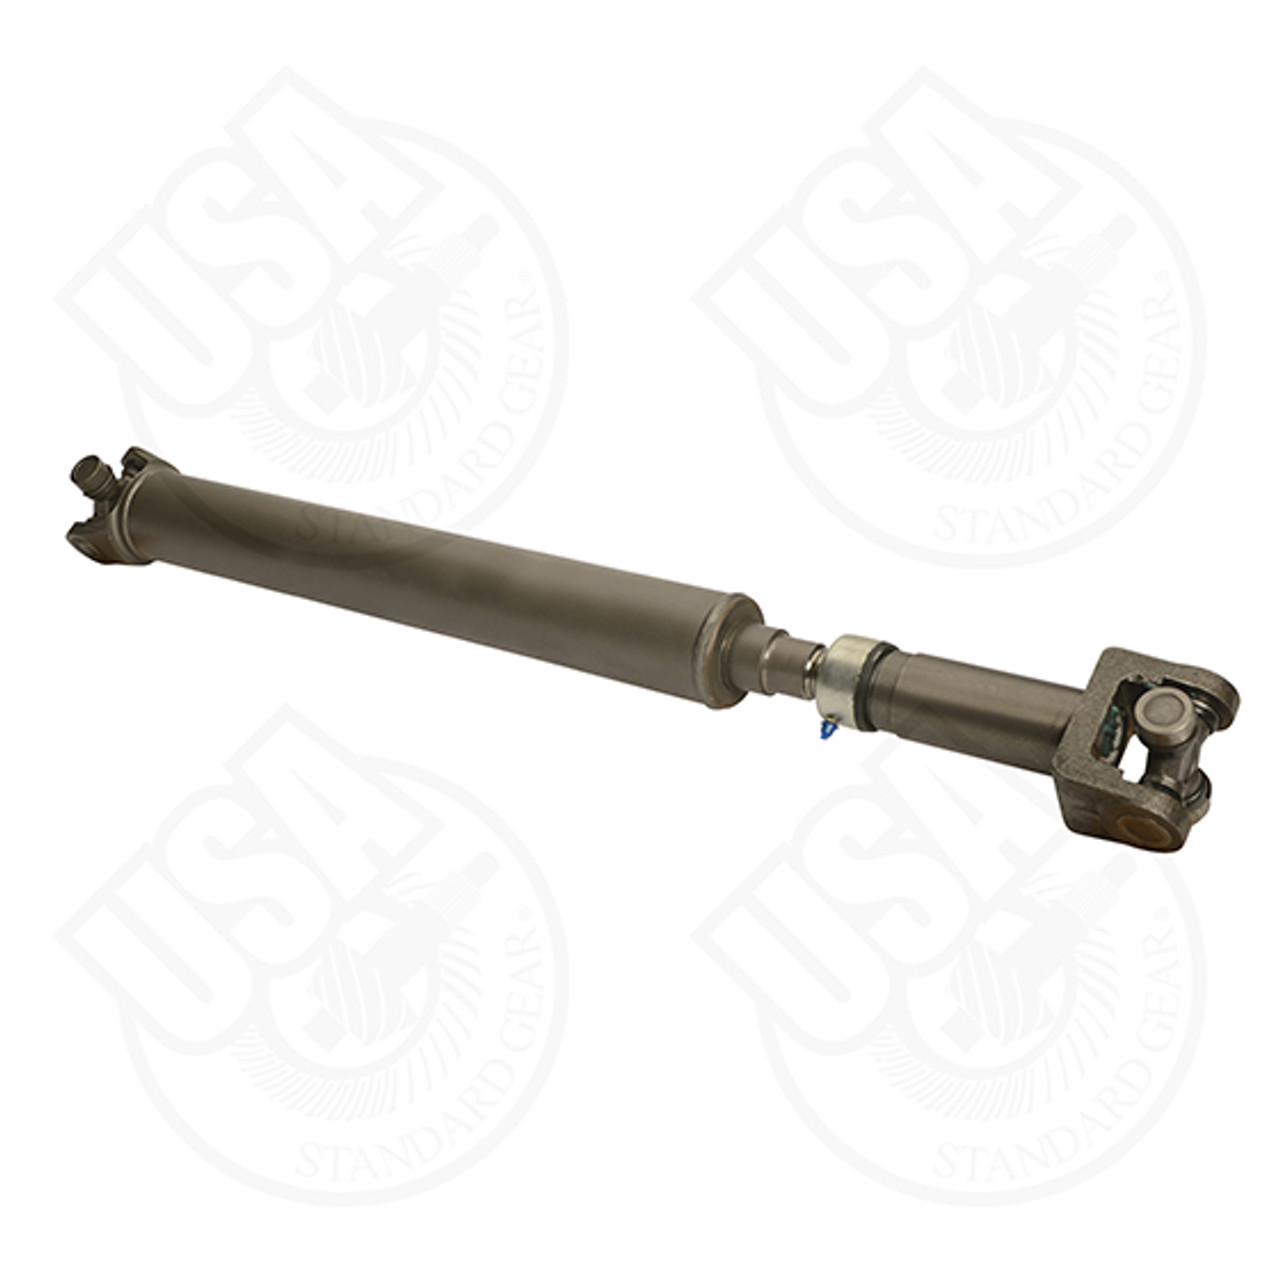 NEW USA Standard Front Driveshaft for Bronco & f-Series Trucks, 34-1/2" Center to Center